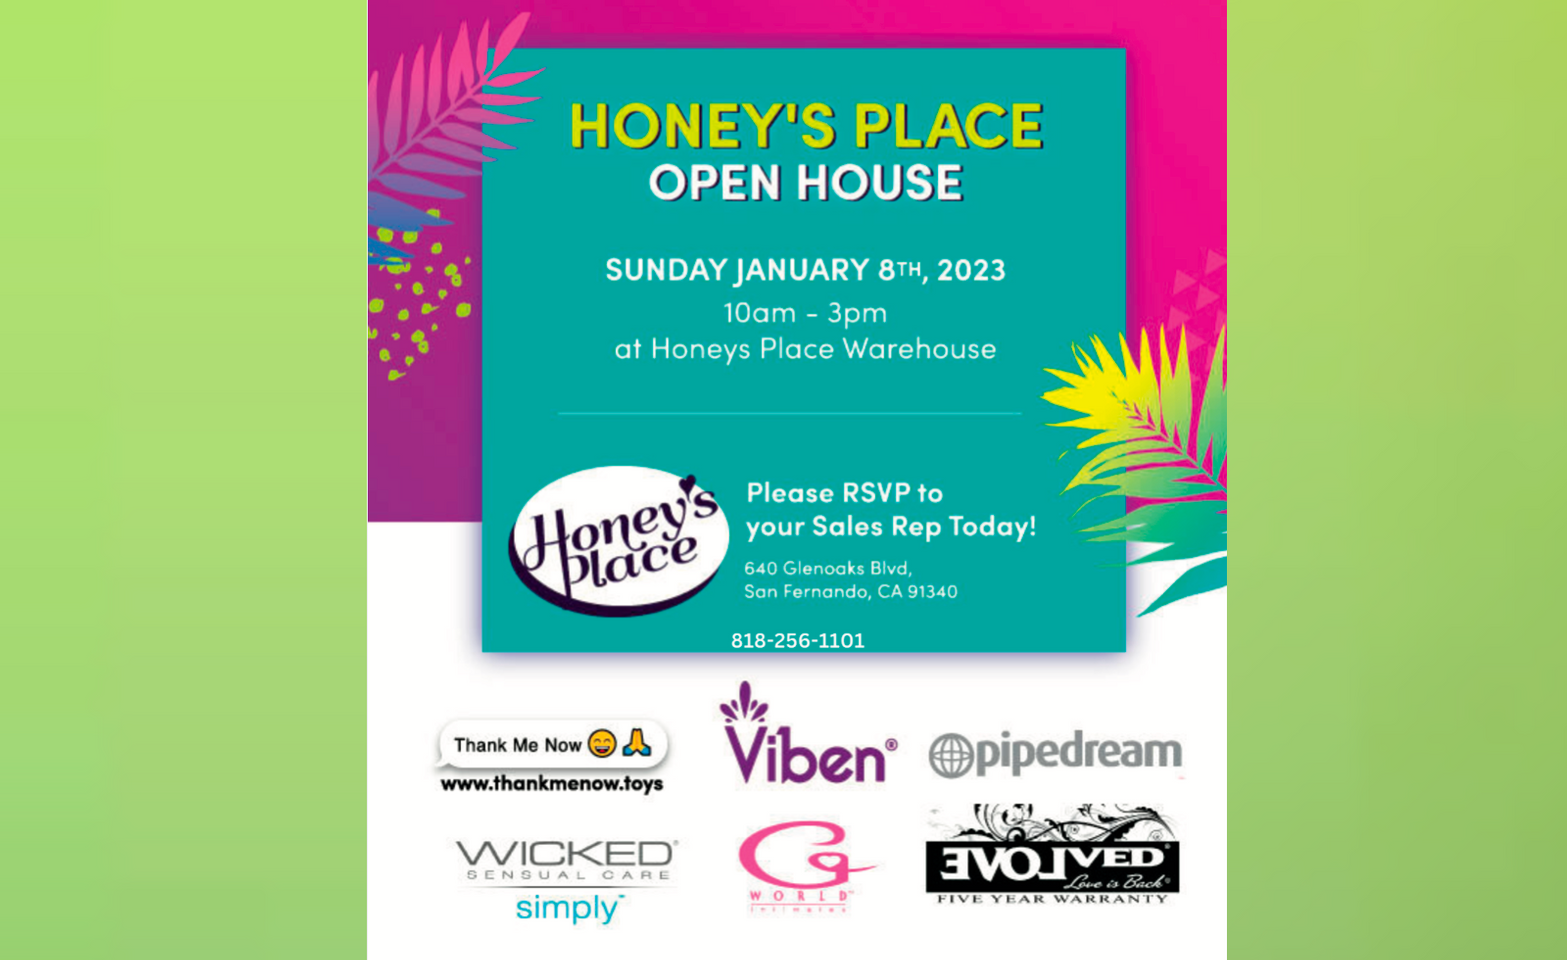 Honey’s Place to Host Open House on January 8